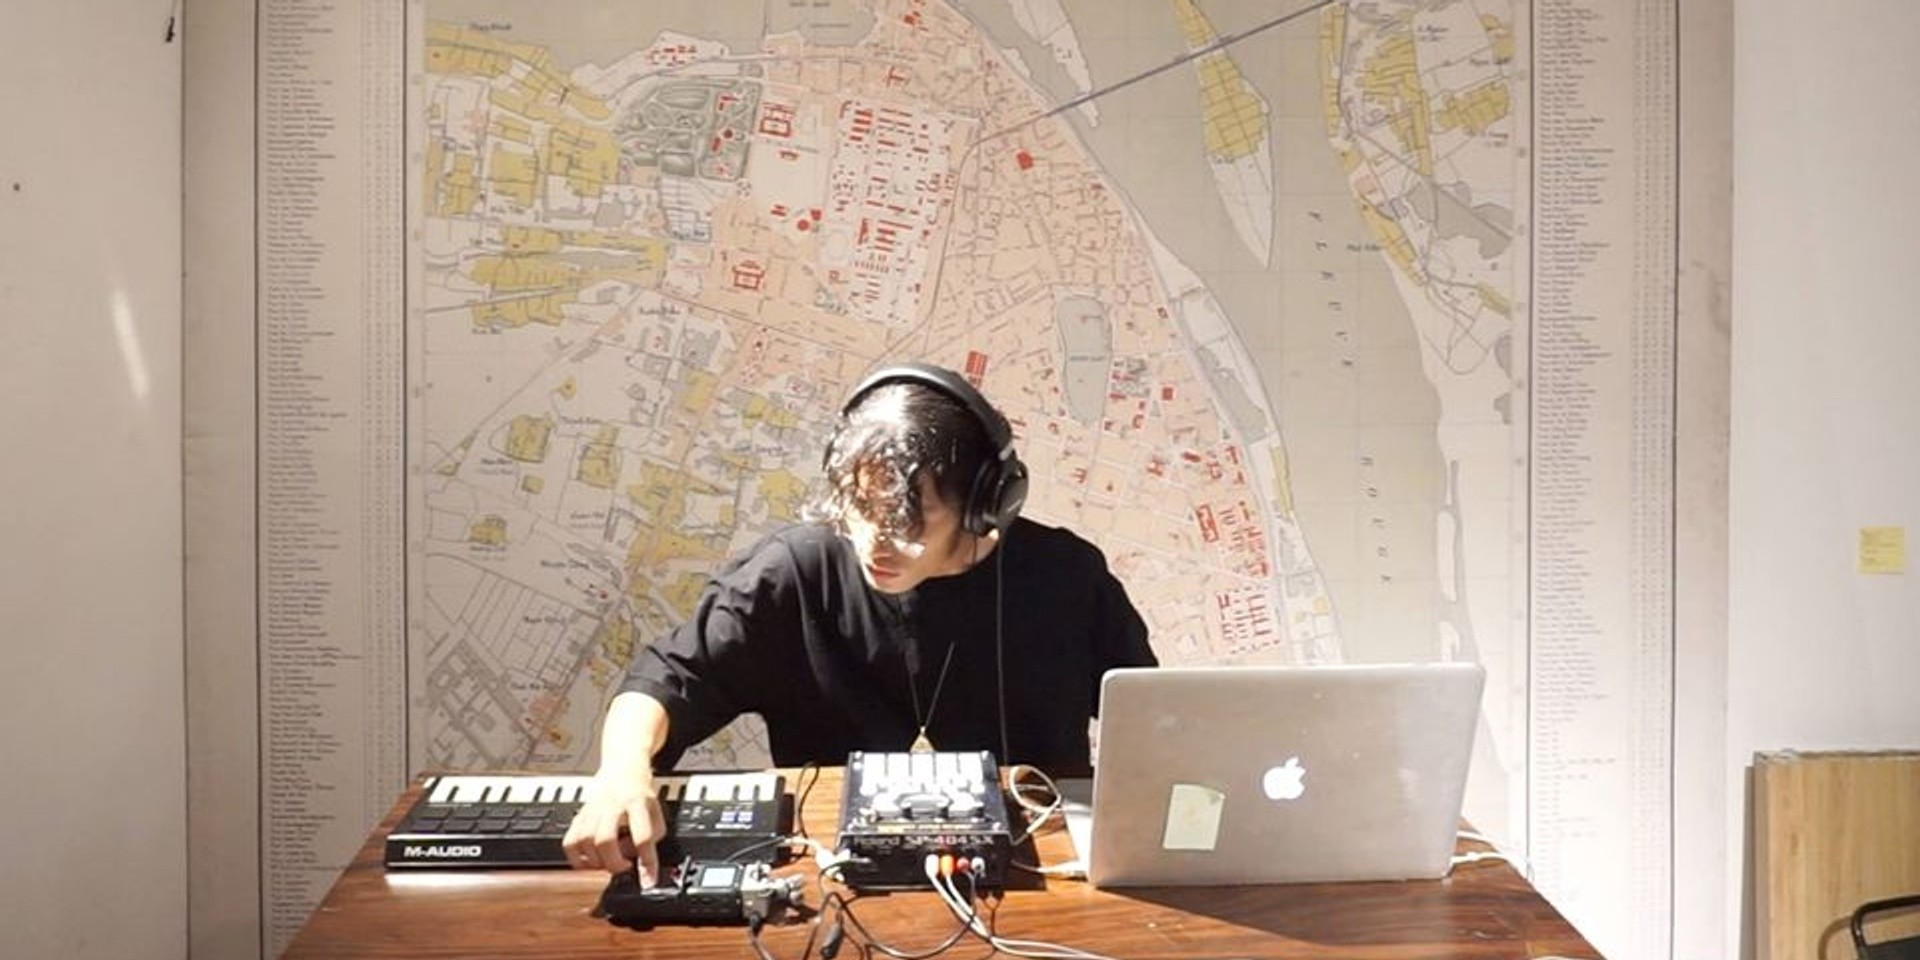 Moving from laundromats to temples, Escuri gives a tour of urban Japan in his album, Wander Studio 